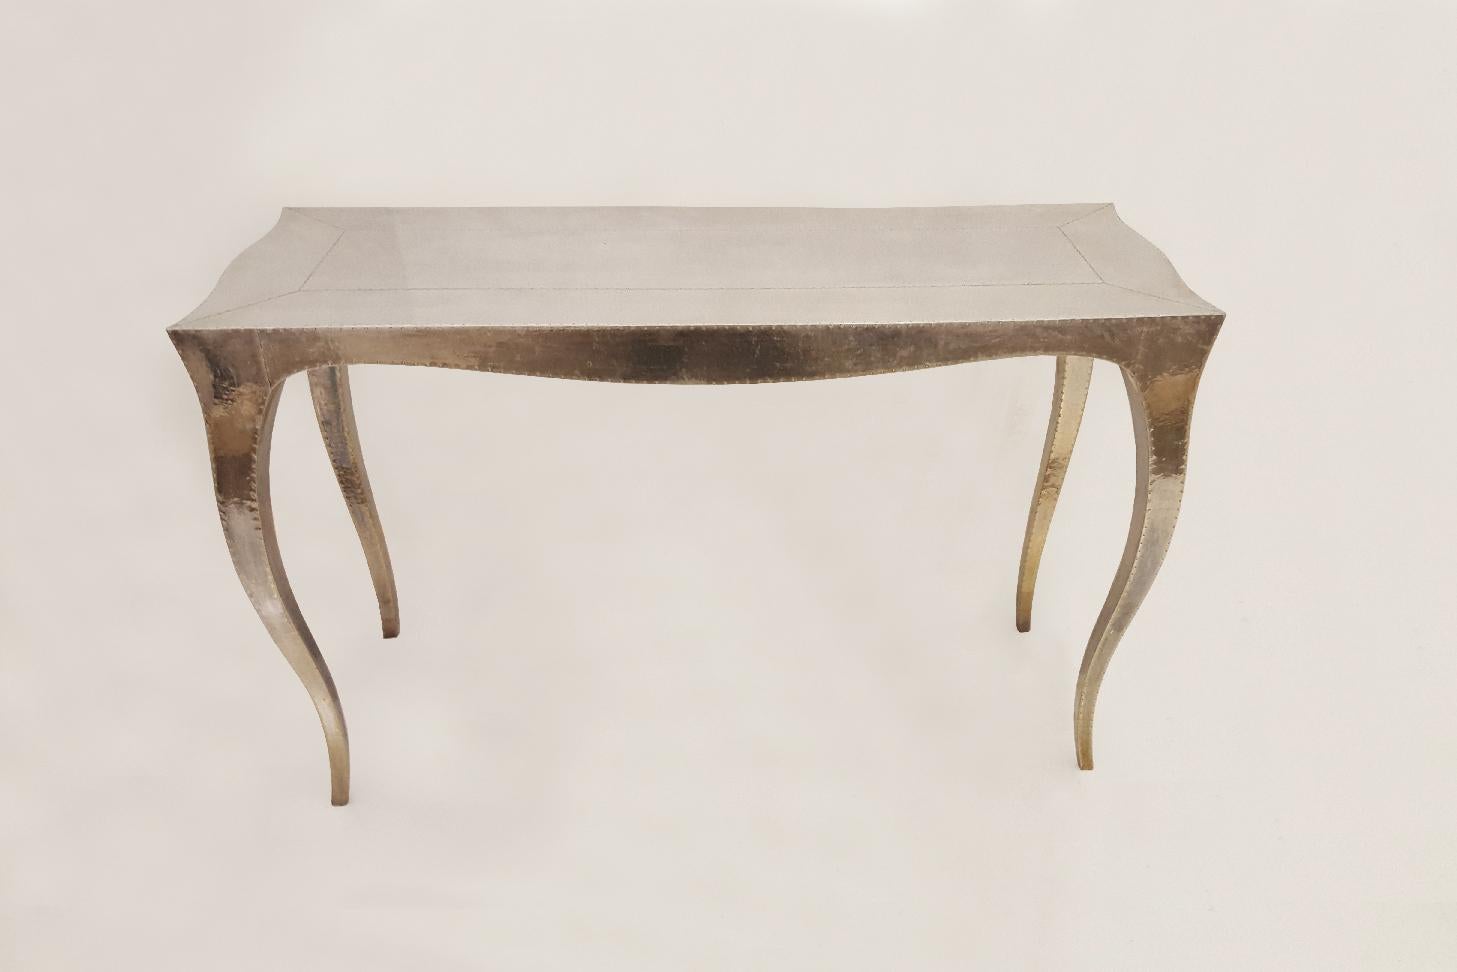 Louise Console Art Deco Industrial and Work Tables Mid. Hammered Antique Bronze For Sale 5